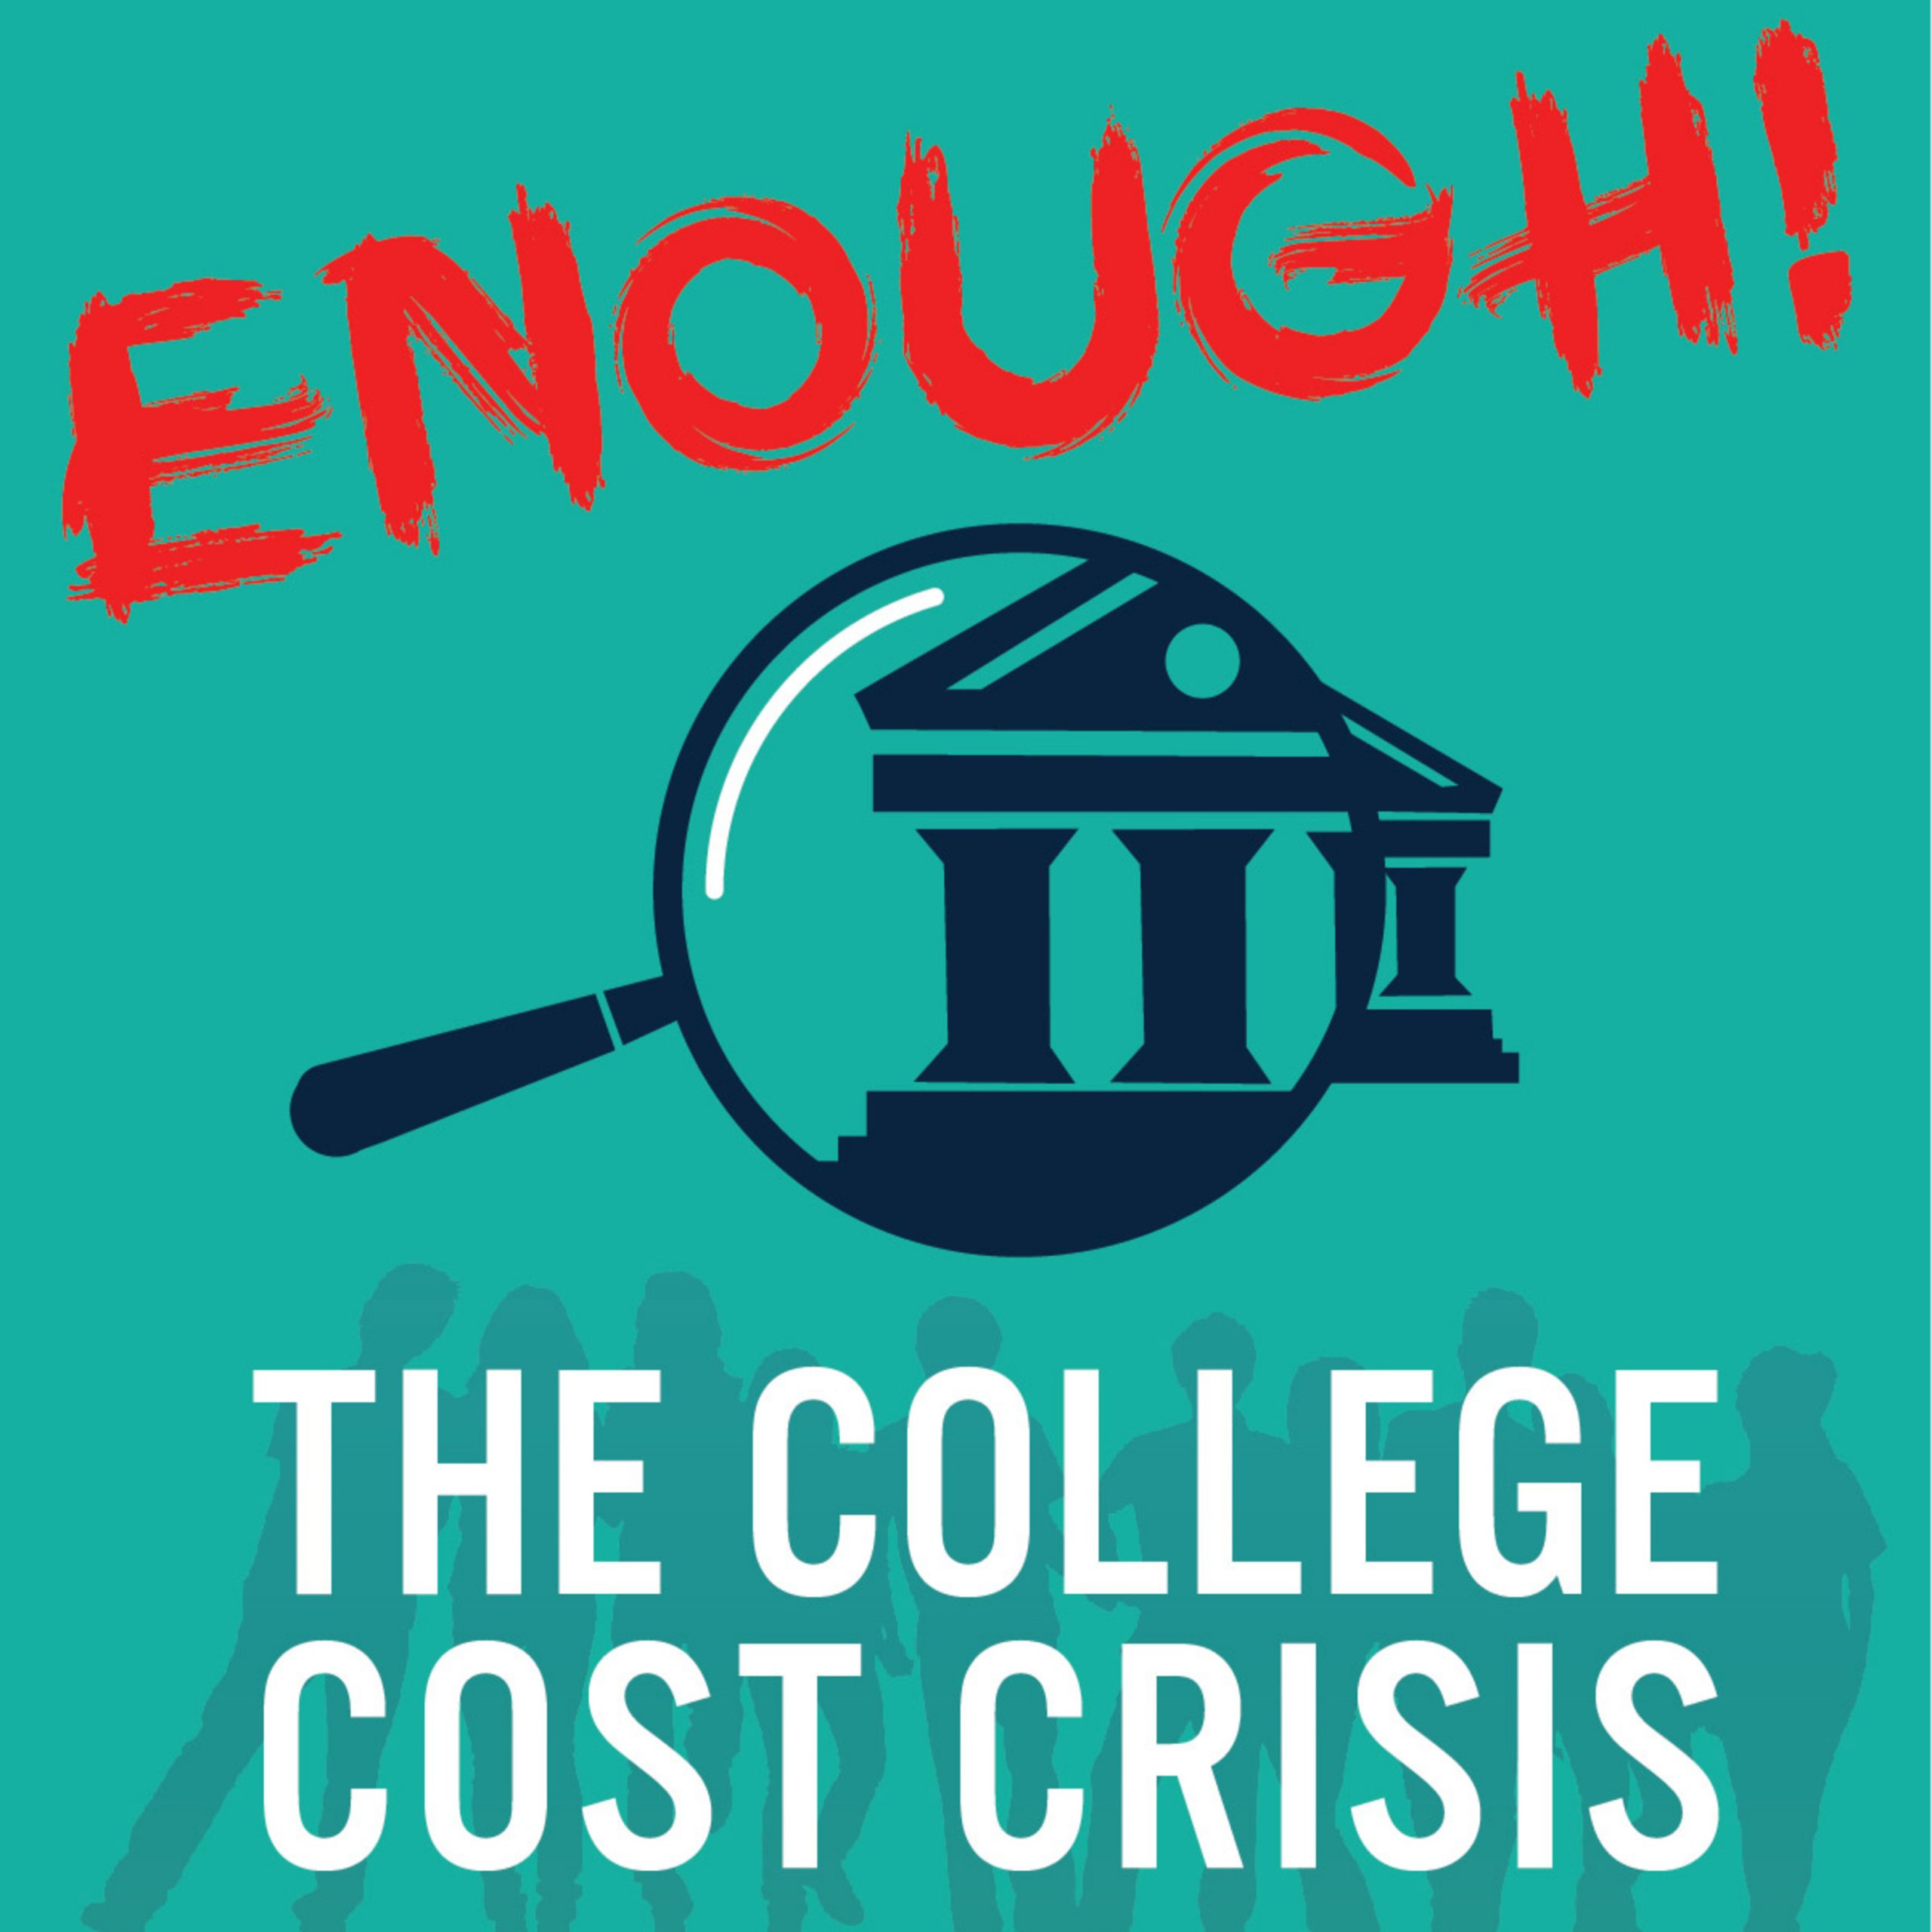 You are currently viewing 47 The College Cost Crisis with Bonnie Burkett